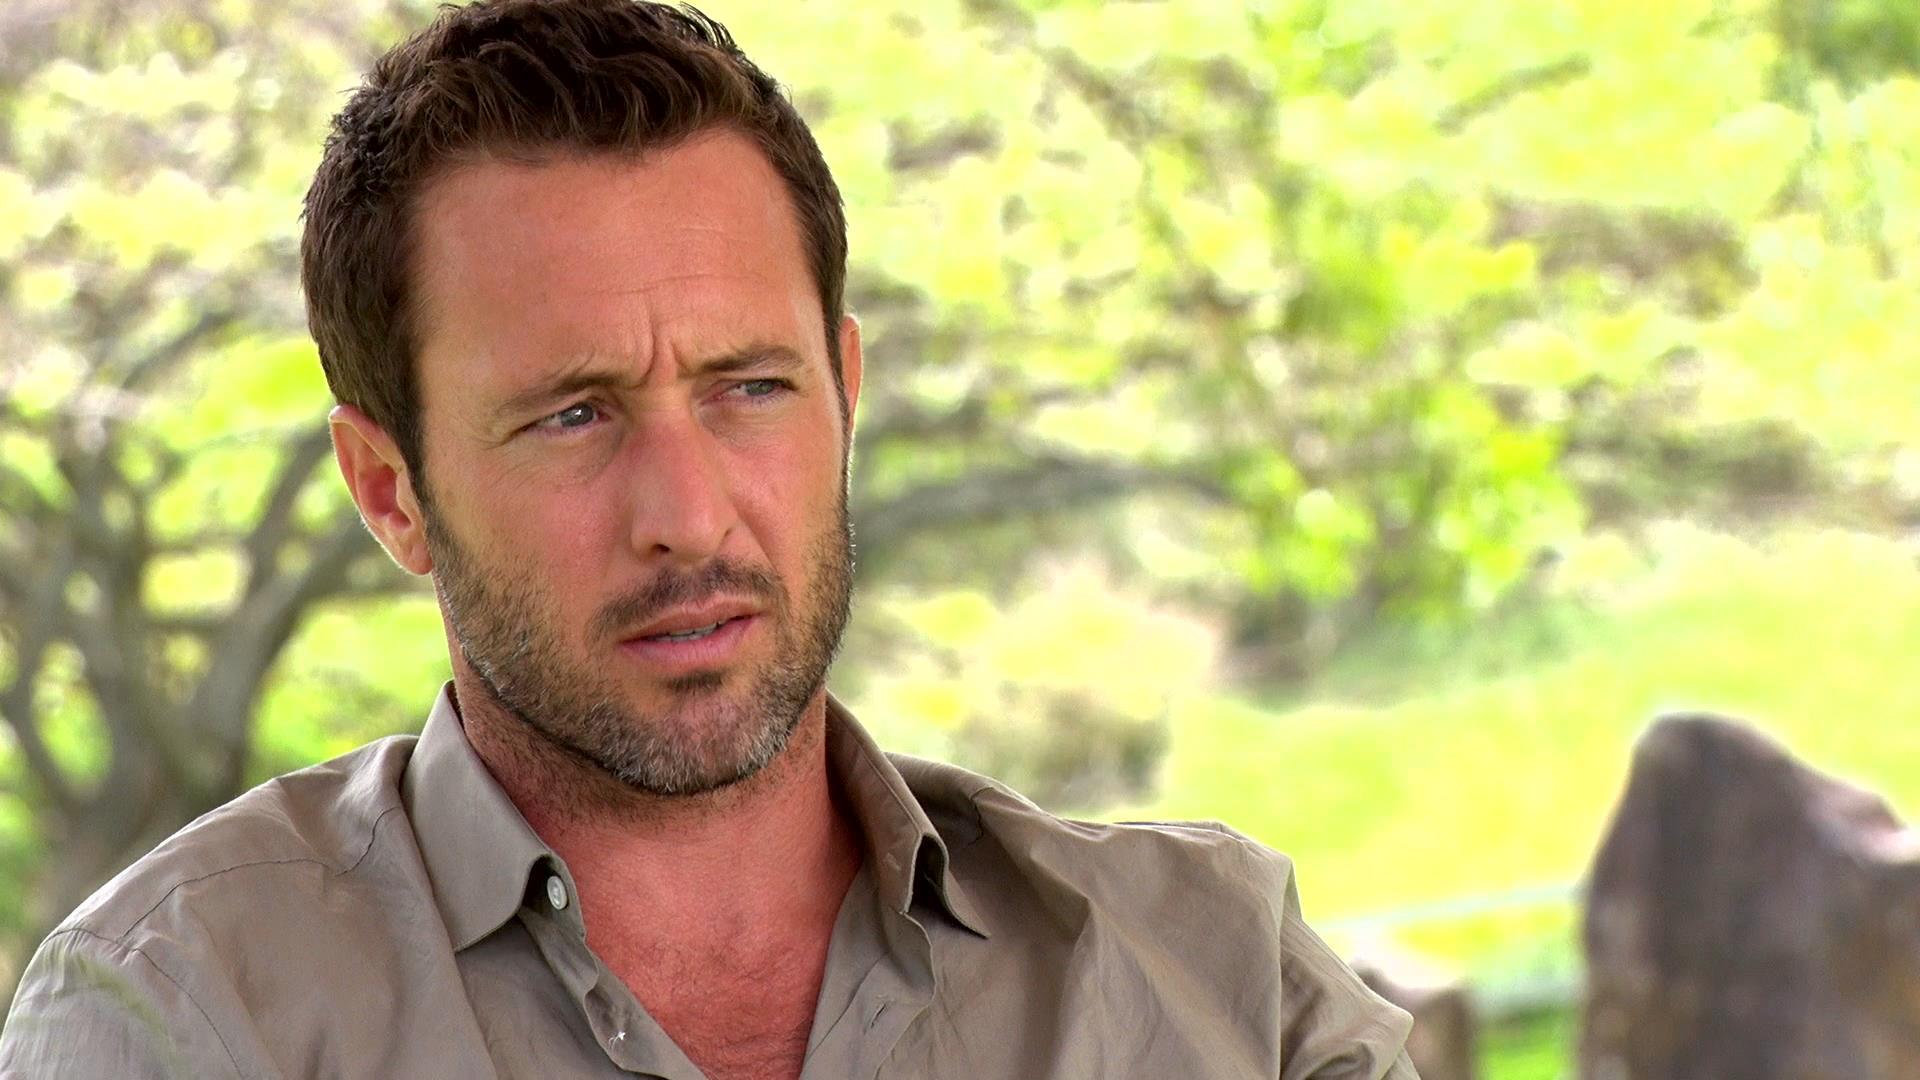 Inspired By Hawaii Five-0's Alex O'Loughlin.